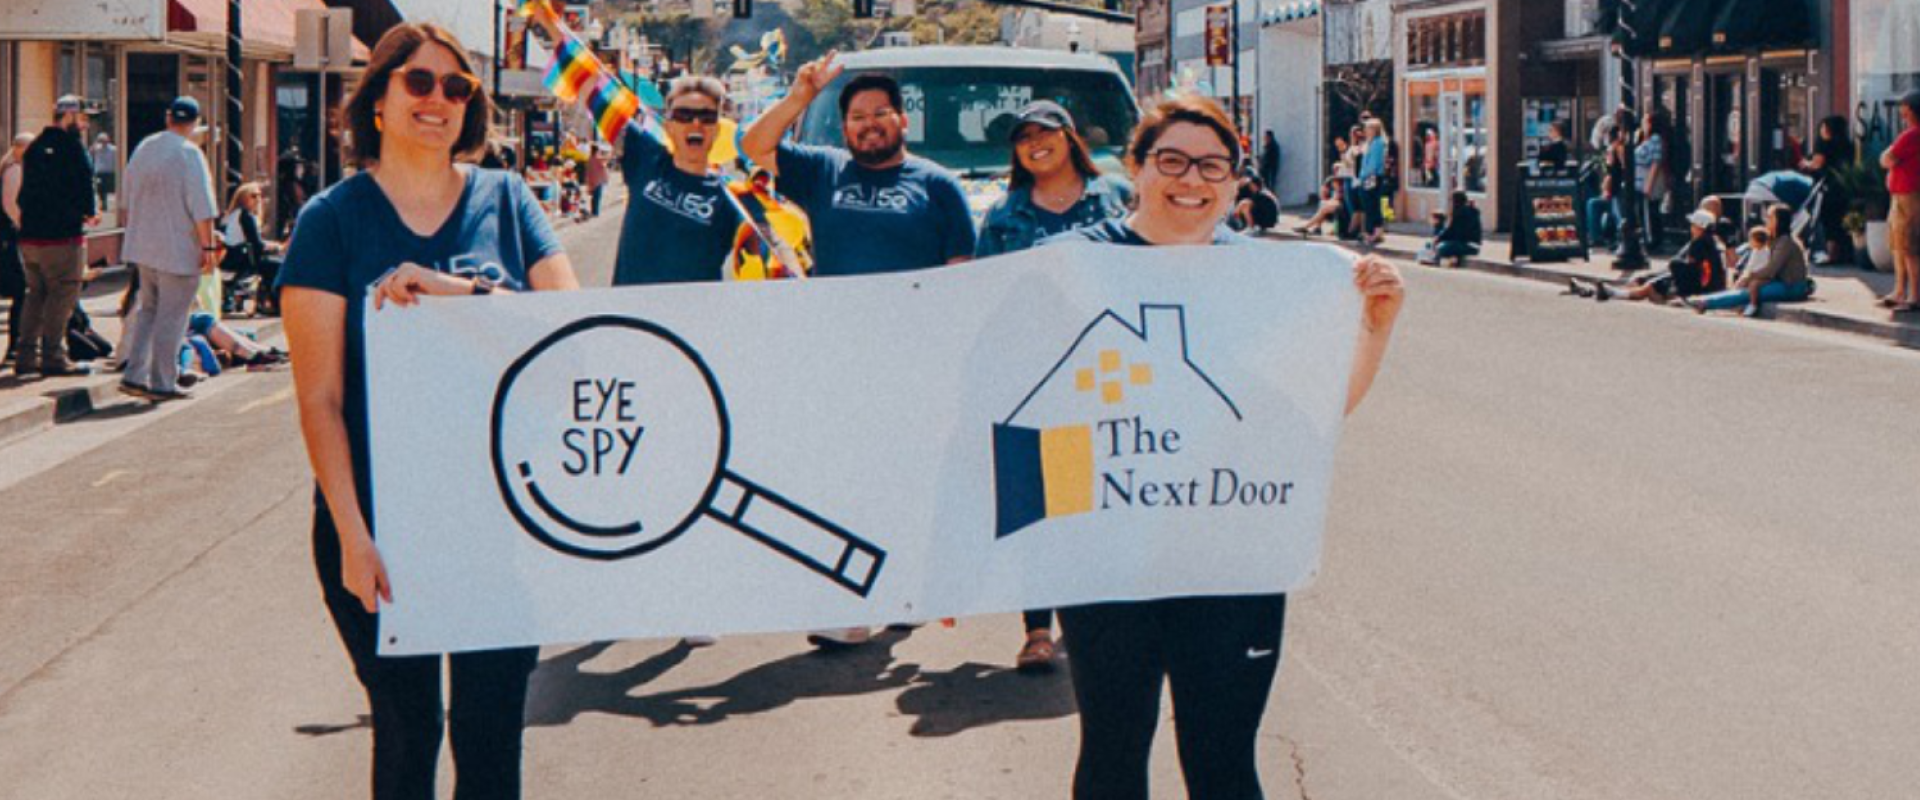 A group of people in a parade hold a banner saying The Next Door.